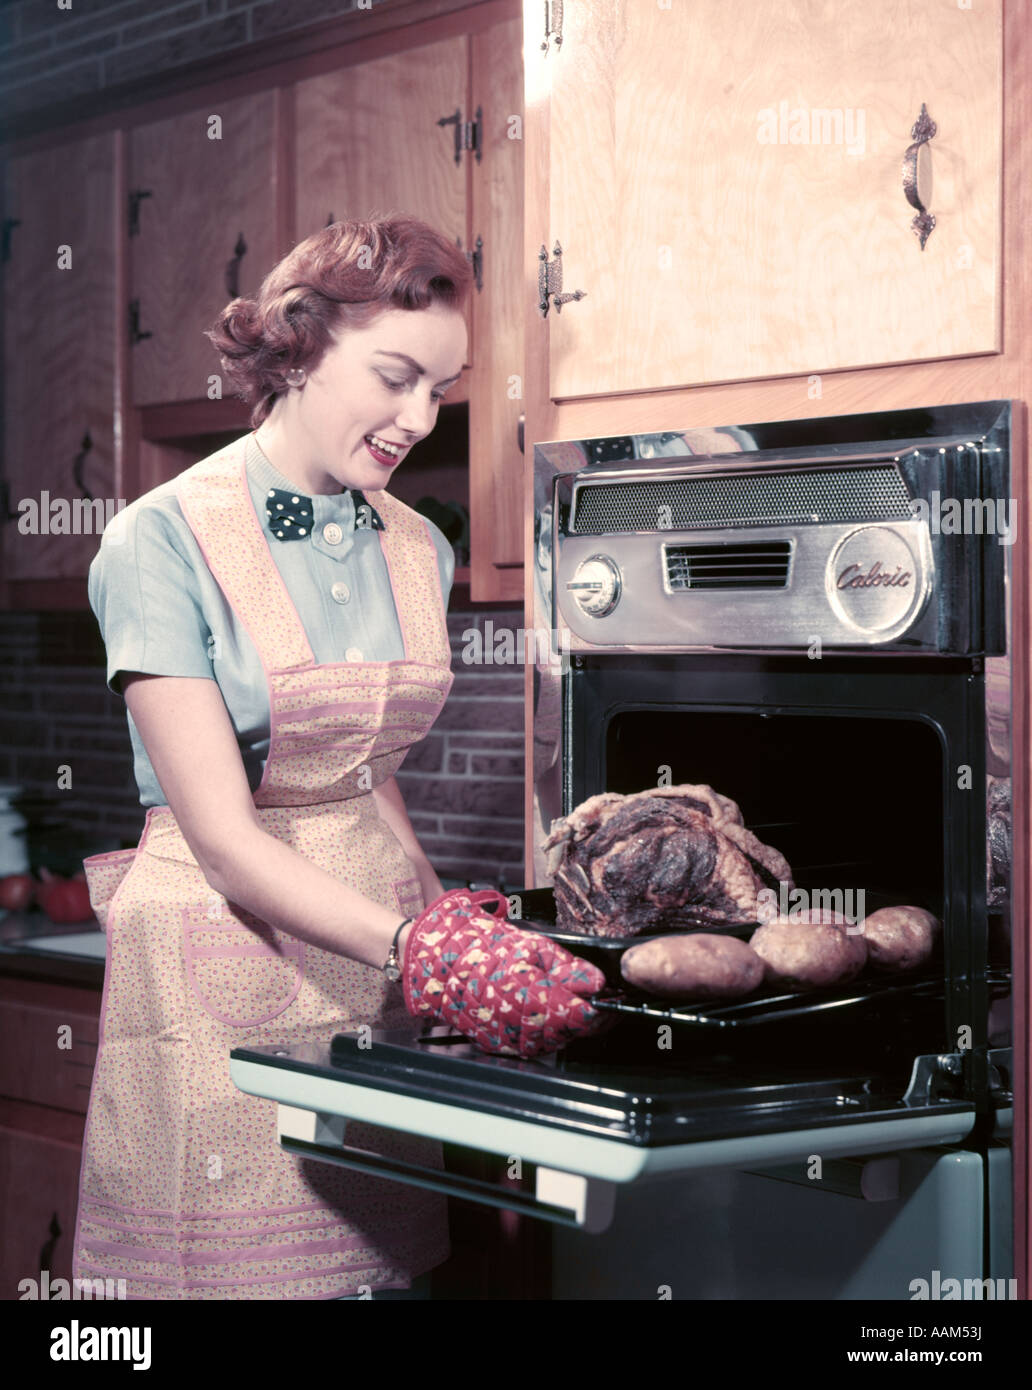 1950s SMILING WOMAN HOUSEWIFE WEARING APRON AND OVEN MITTS TAKING ROAST  BEEF WITH POTATOES OUT OF KITCHEN OVEN Stock Photo - Alamy